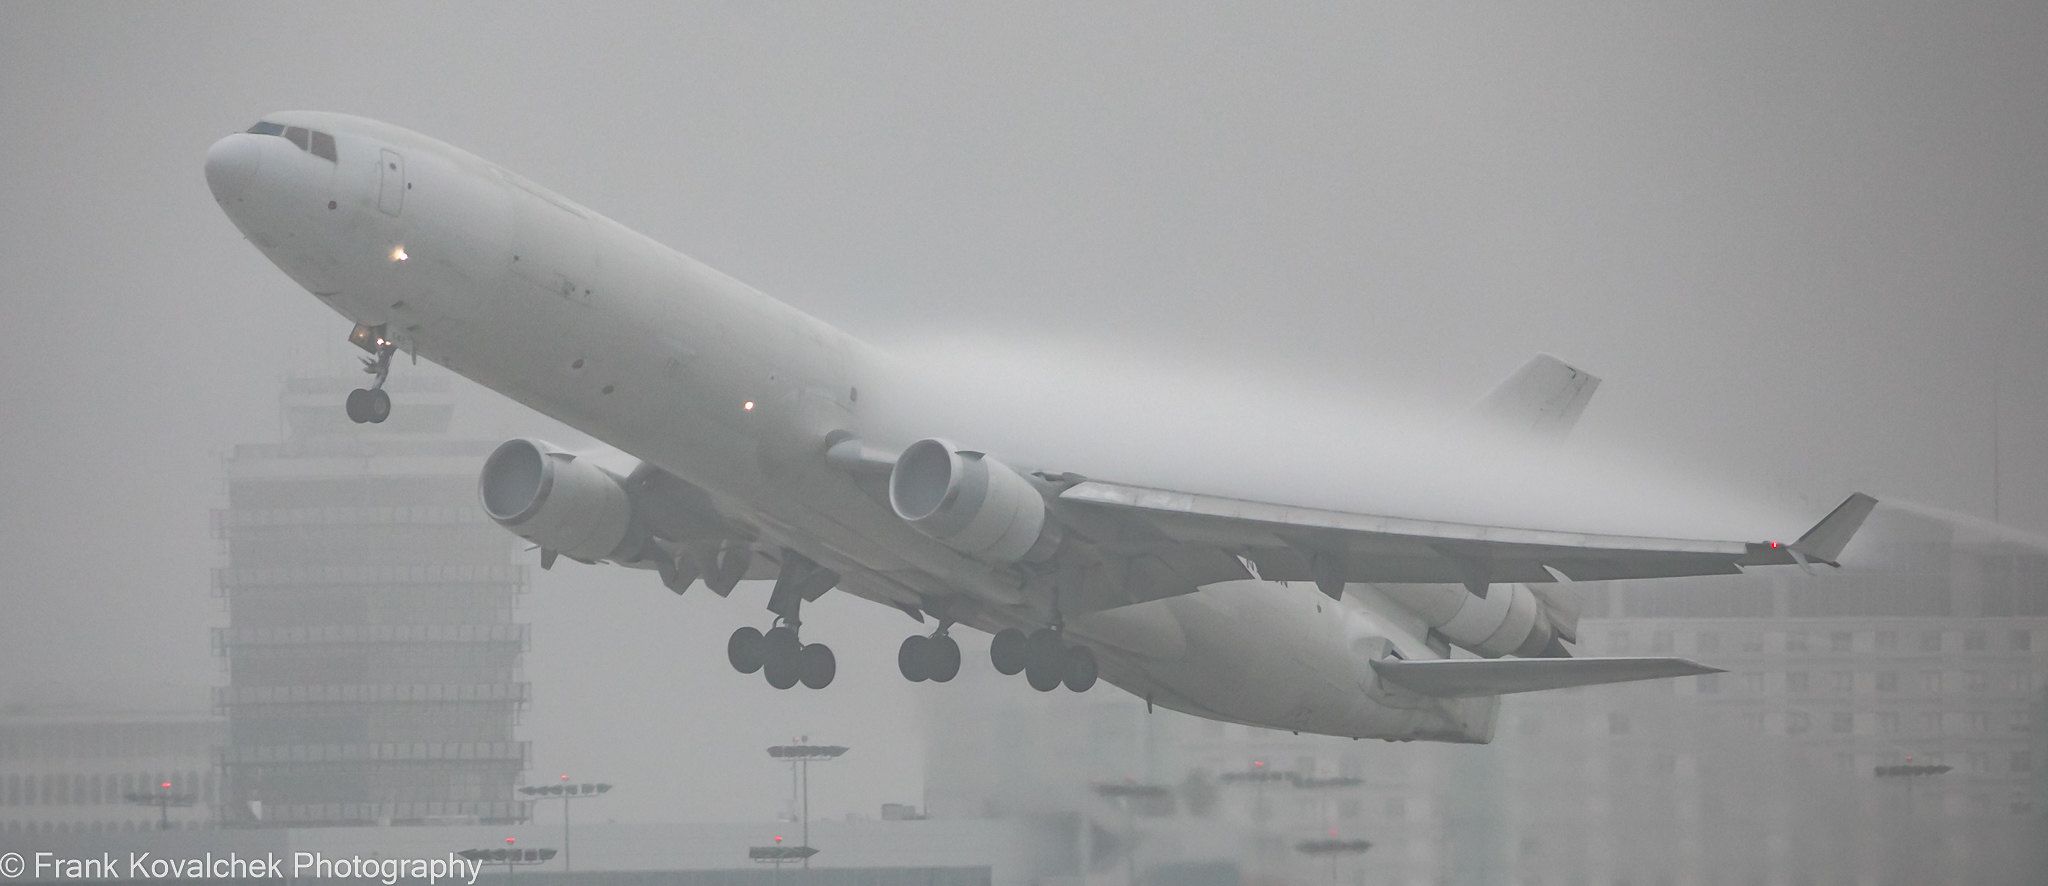 Western Global MD-11 Leaving LAX (in fog and creating vapes)